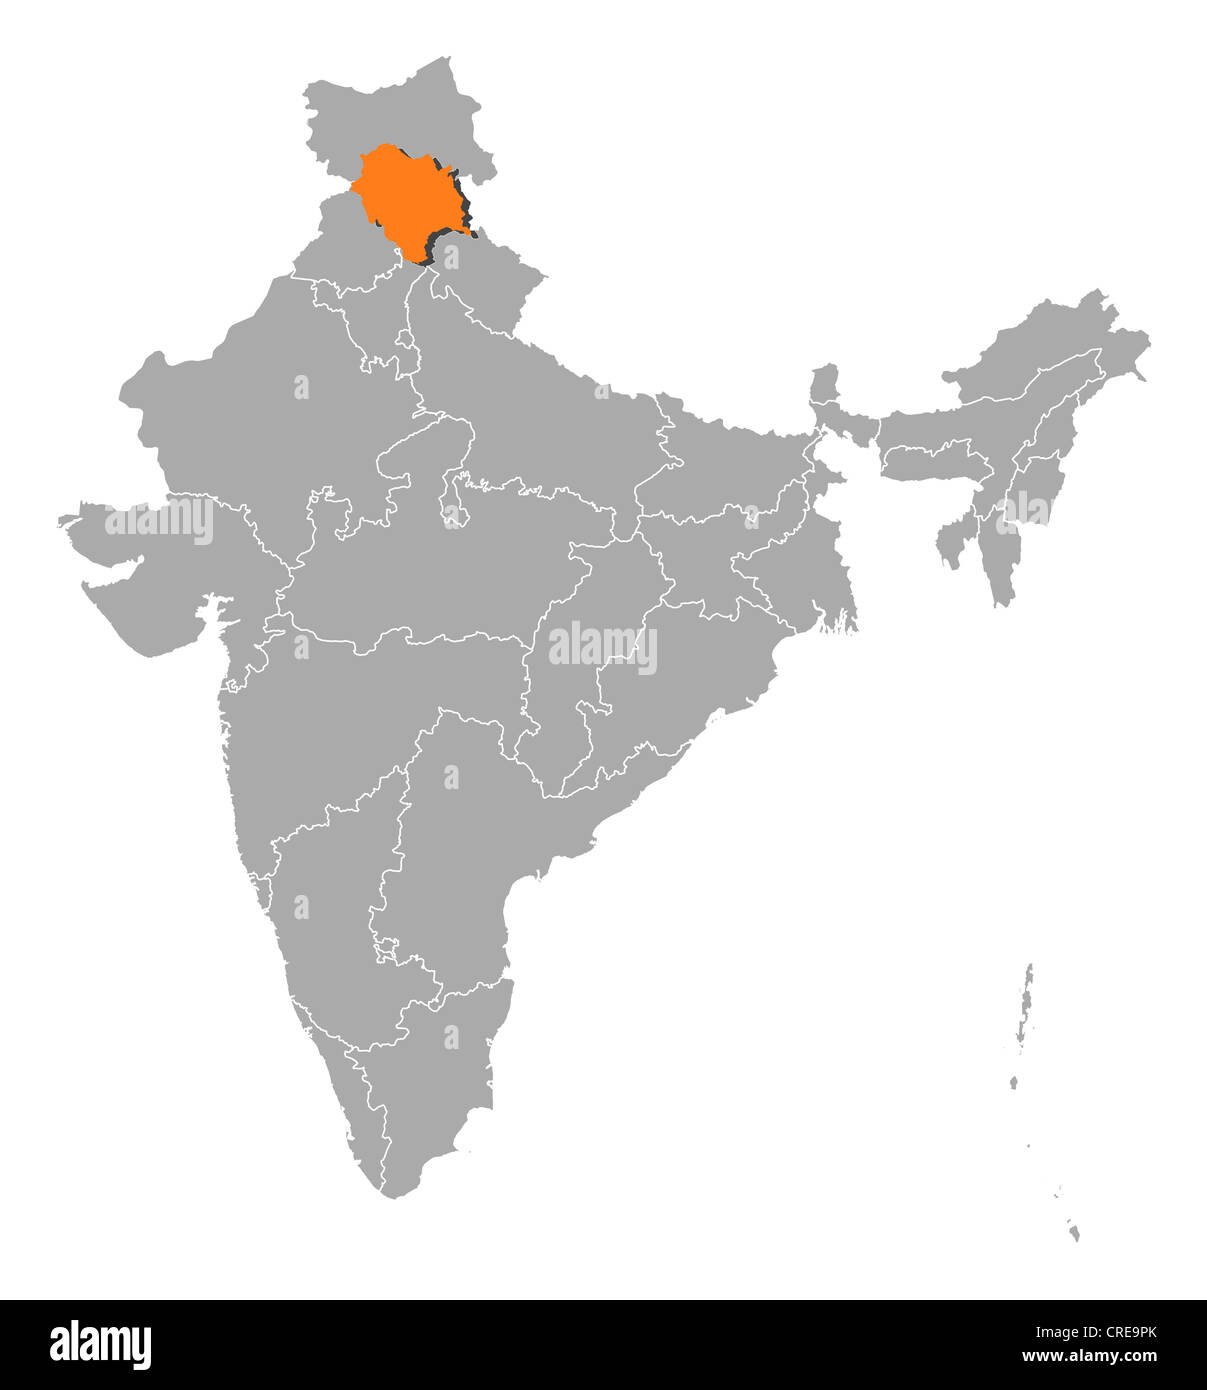 Political map of India with the several states where Himachal Pradesh is highlighted. Stock Photo